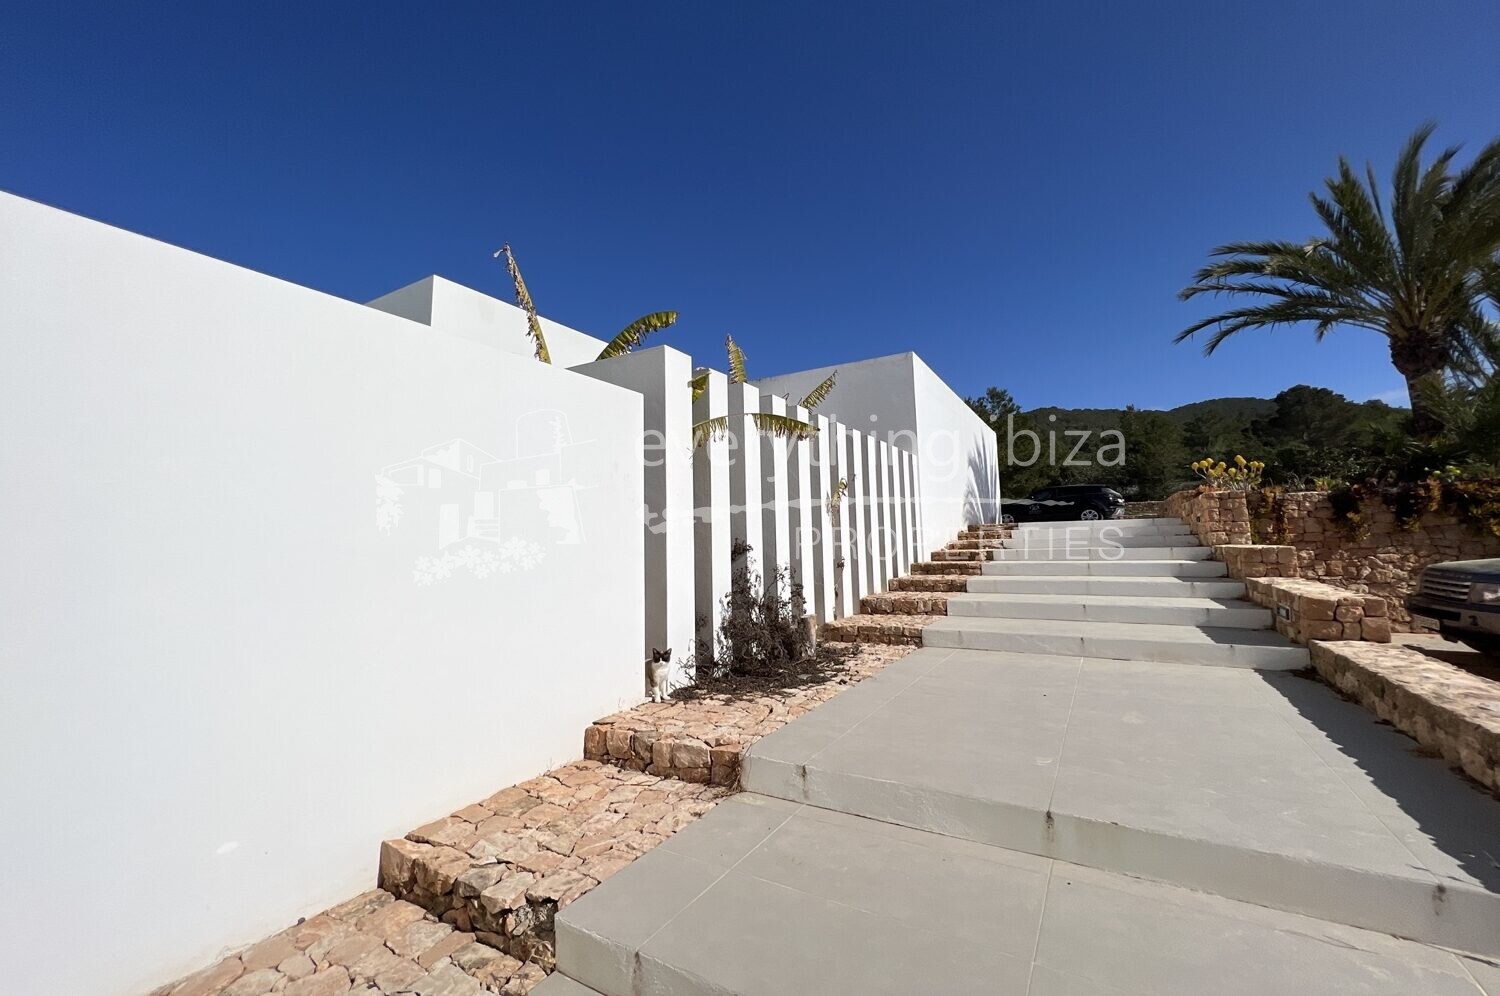 Magnificent Modern Villa Set in Beautiful Countryside, ref. 1423, for sale in Ibiza by everything ibiza Properties